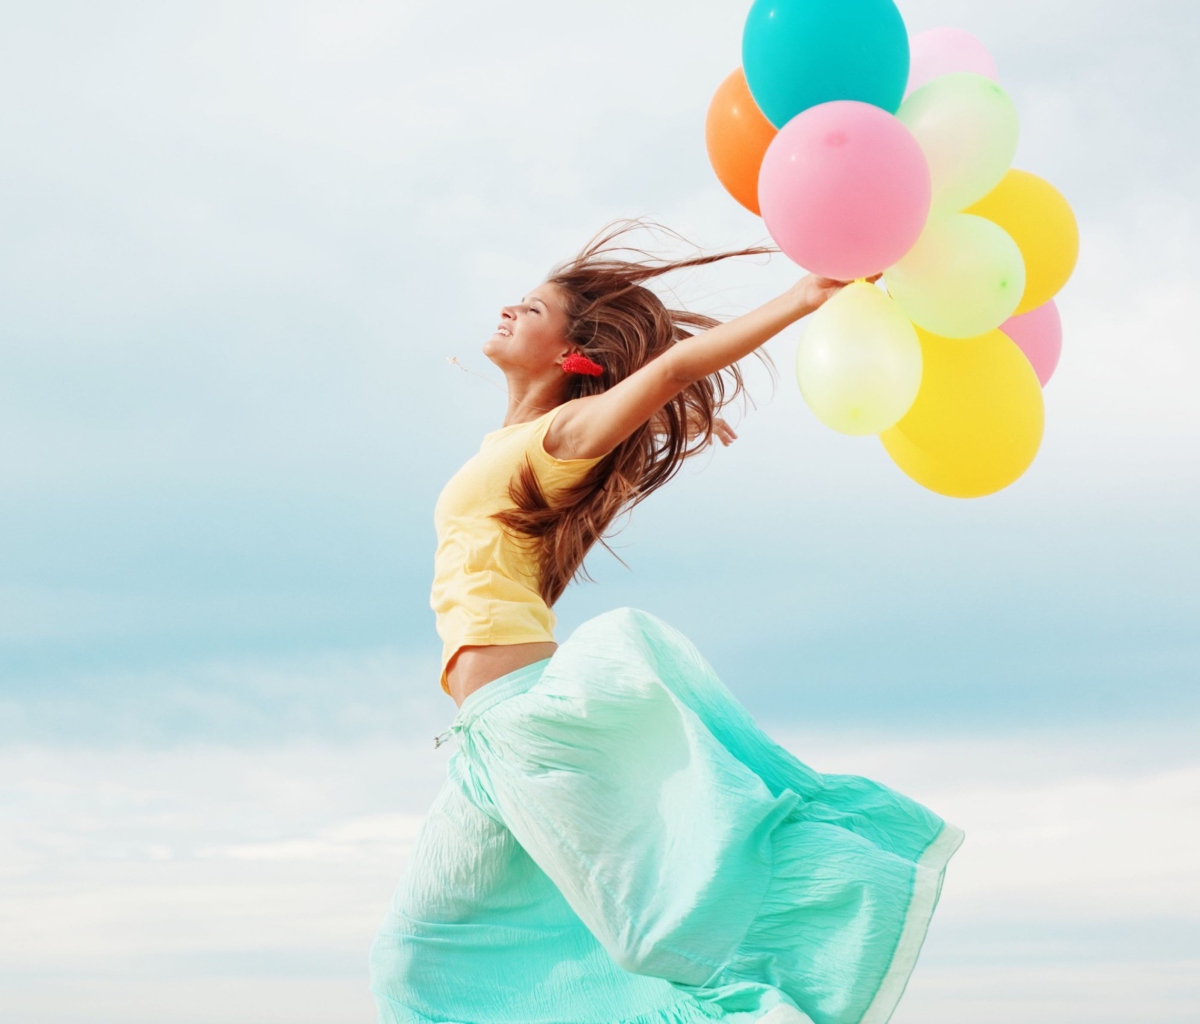 Girl With Colorful Balloons screenshot #1 1200x1024